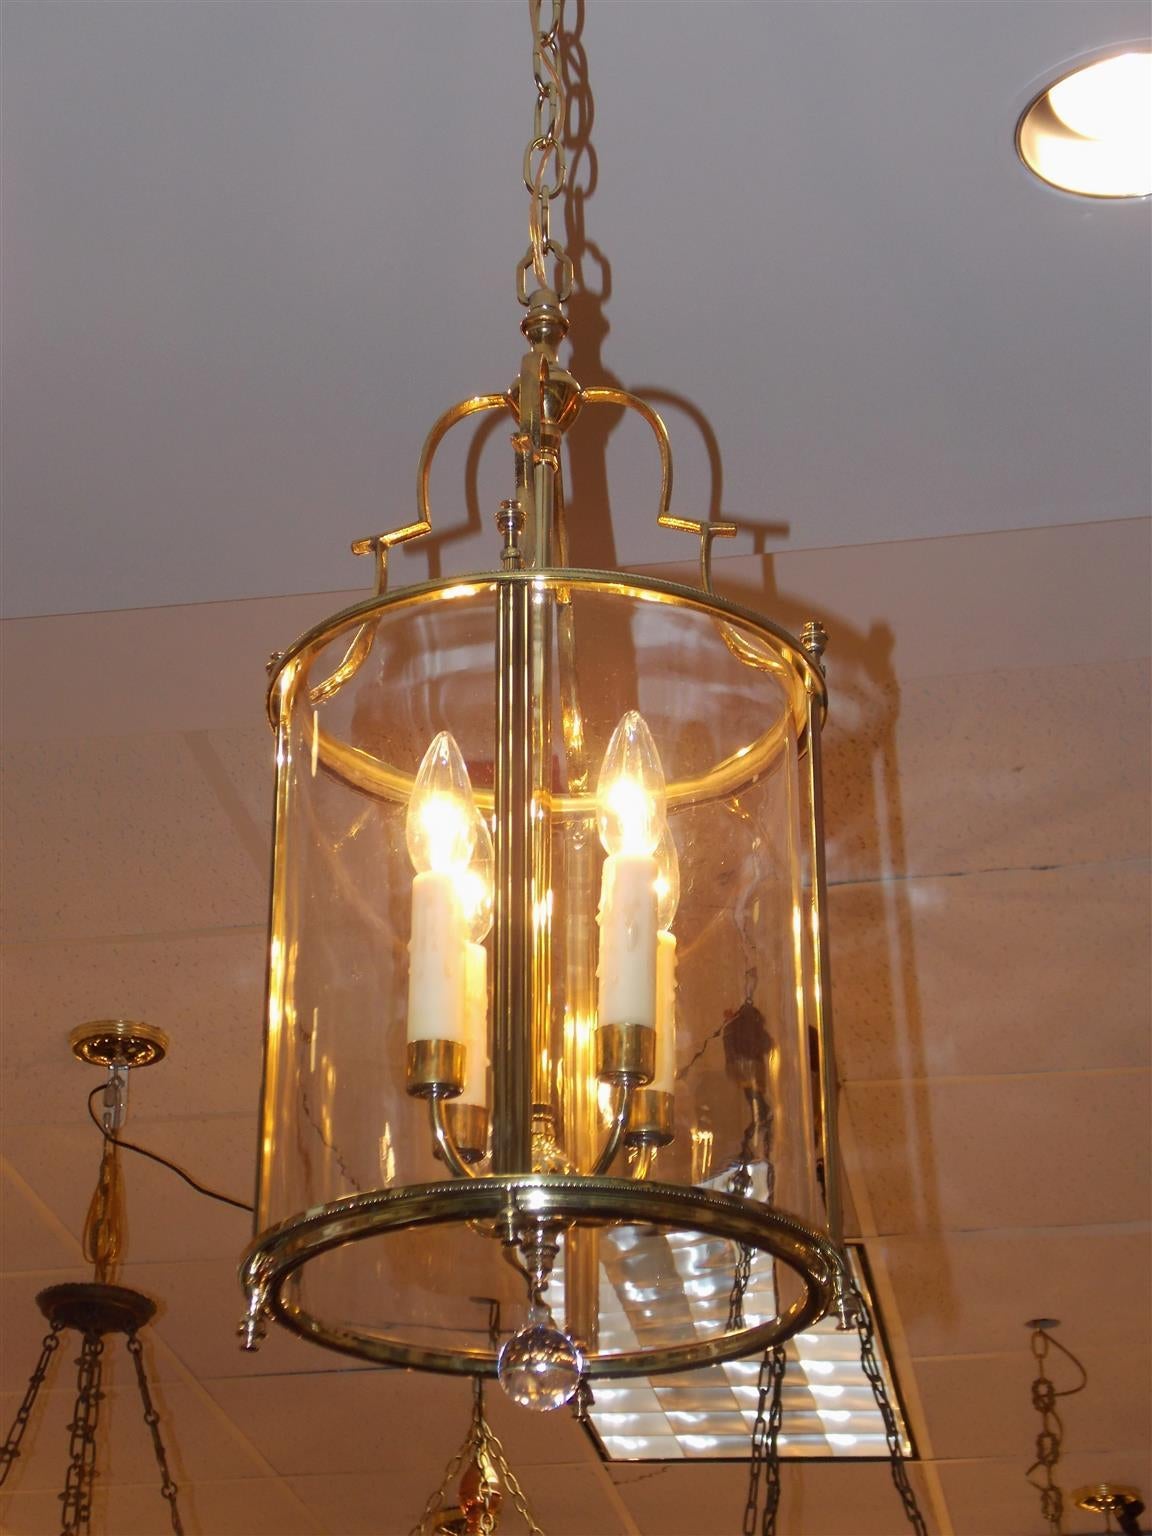 American brass four-light circular glass hanging lantern with decorative scrolled arms, urn finials, beaded chase work, and terminating with crystal ball, Mid-19th Century.